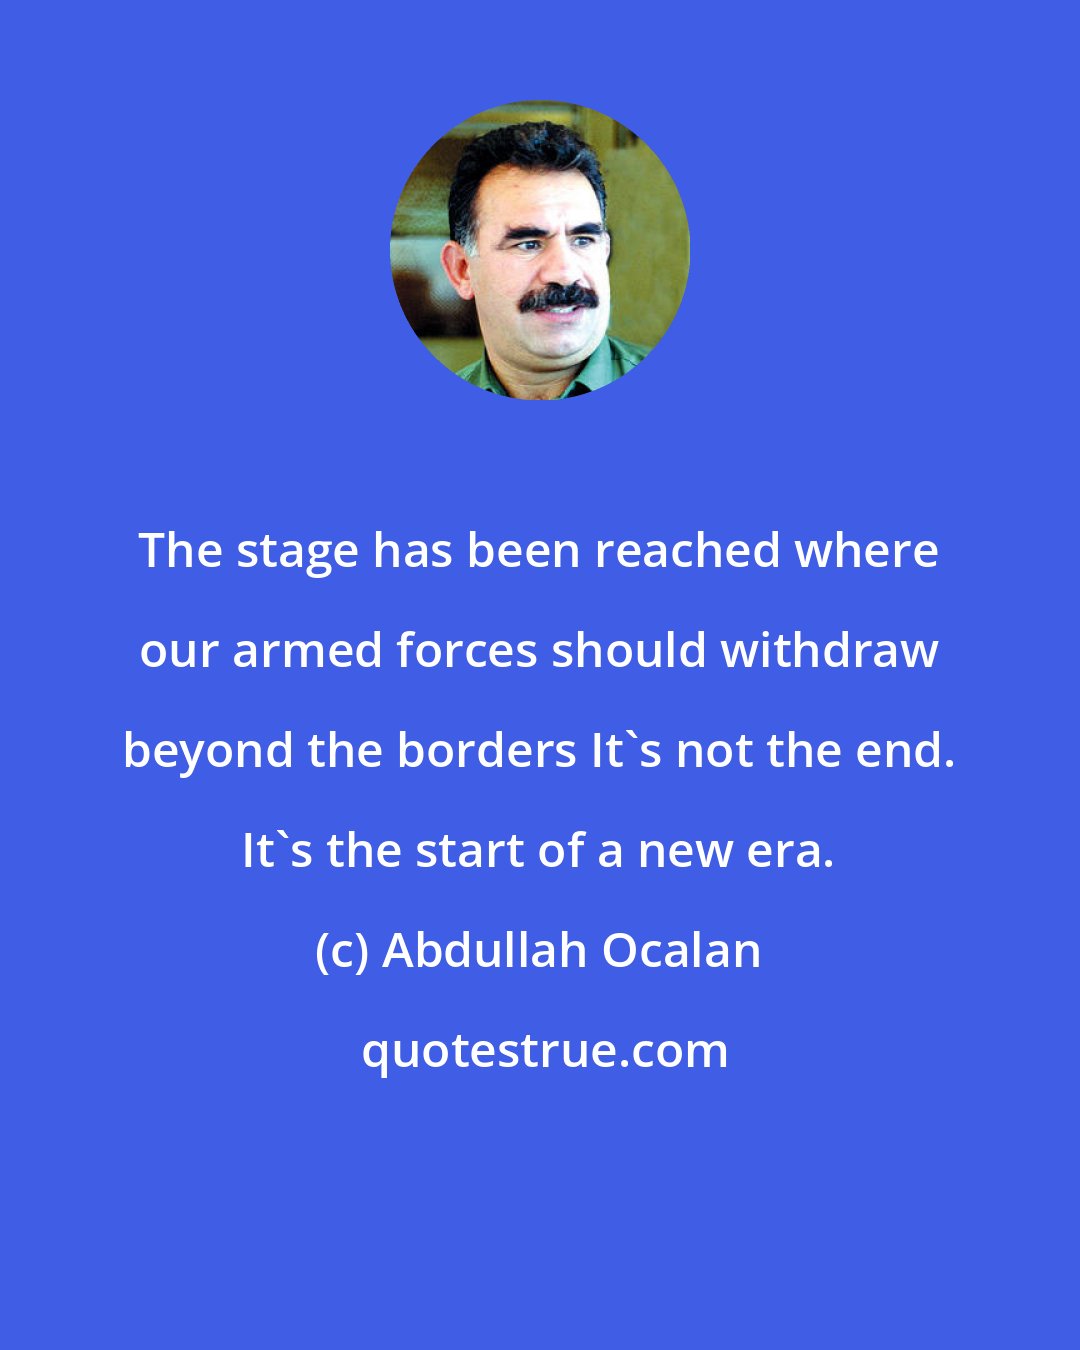 Abdullah Ocalan: The stage has been reached where our armed forces should withdraw beyond the borders It's not the end. It's the start of a new era.